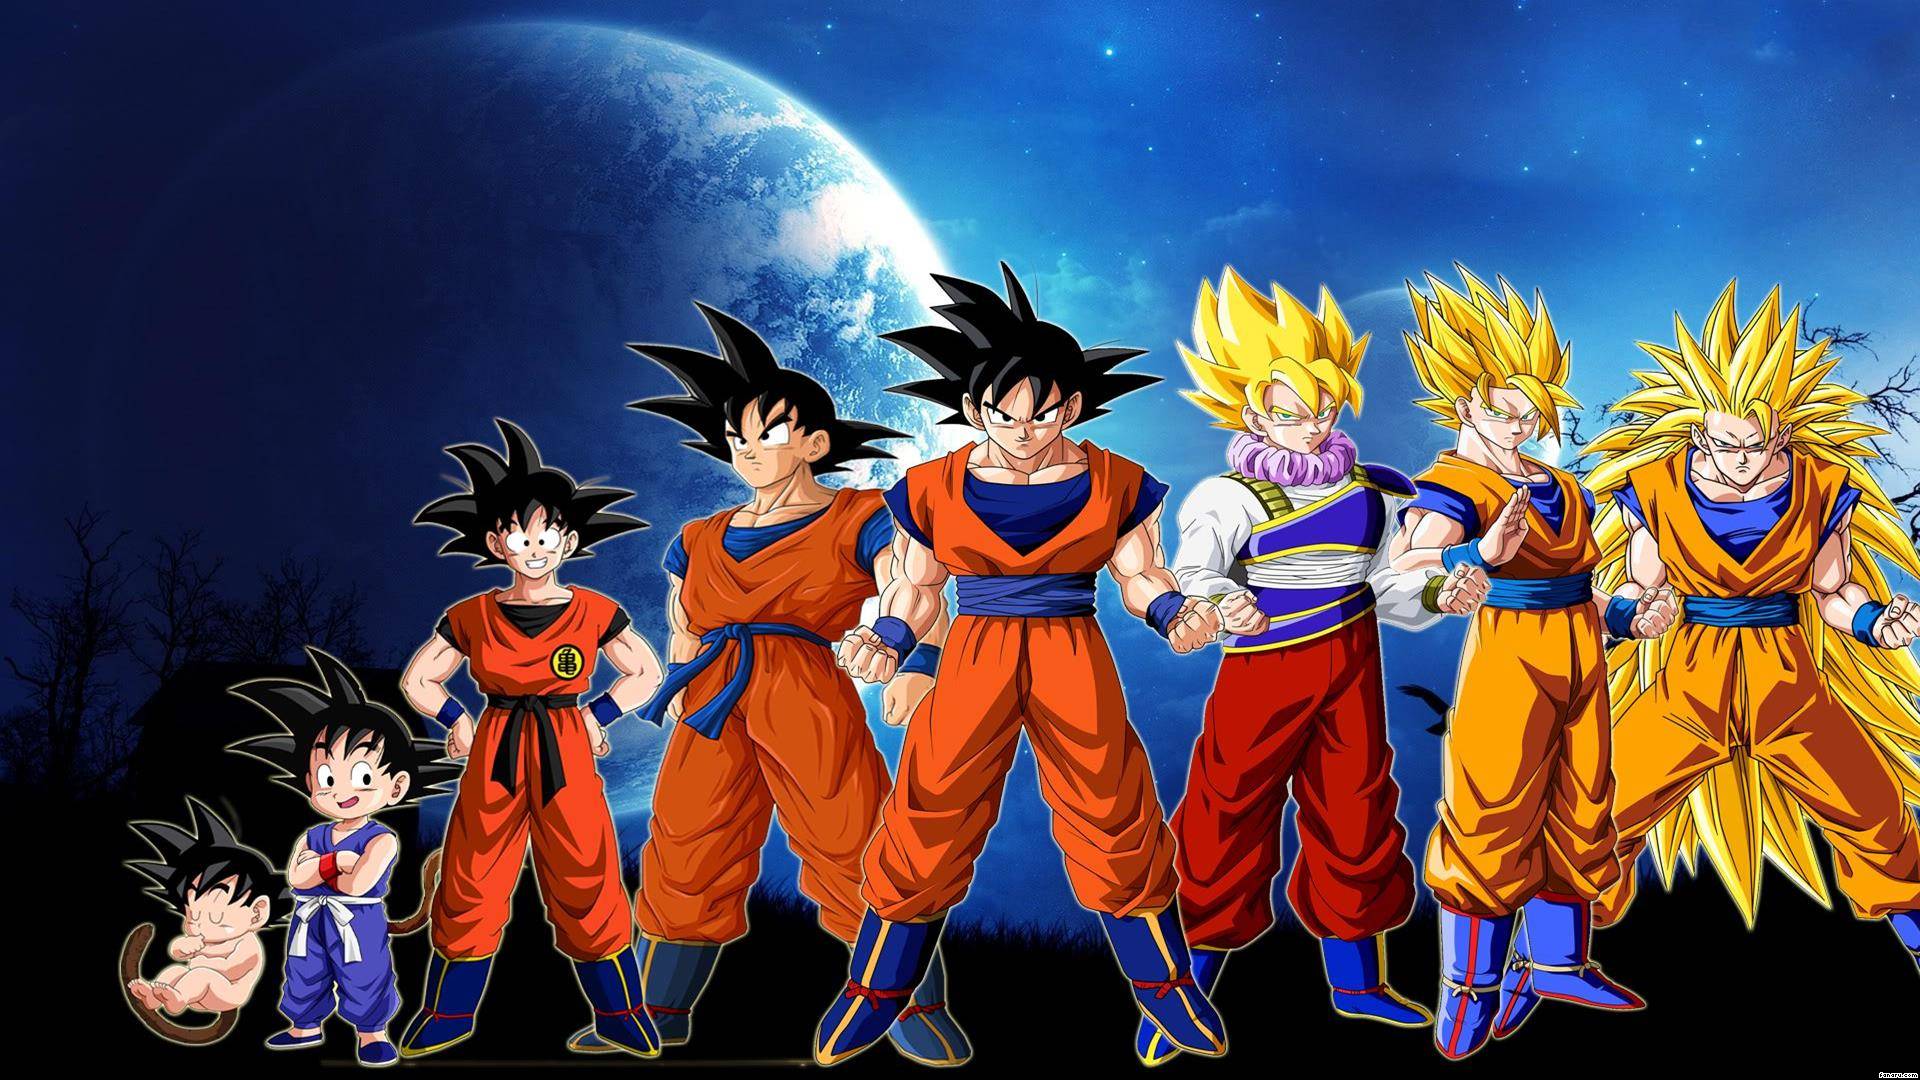 Free Download Dragon Ball Z Wallpapers Best Wallpapers 1920x1080 For Your Desktop Mobile Tablet Explore 76 Dragon Ballz Wallpaper Goku Wallpaper Free Dragon Wallpaper For Desktop Dragon Ball Z Wallpaper Hd